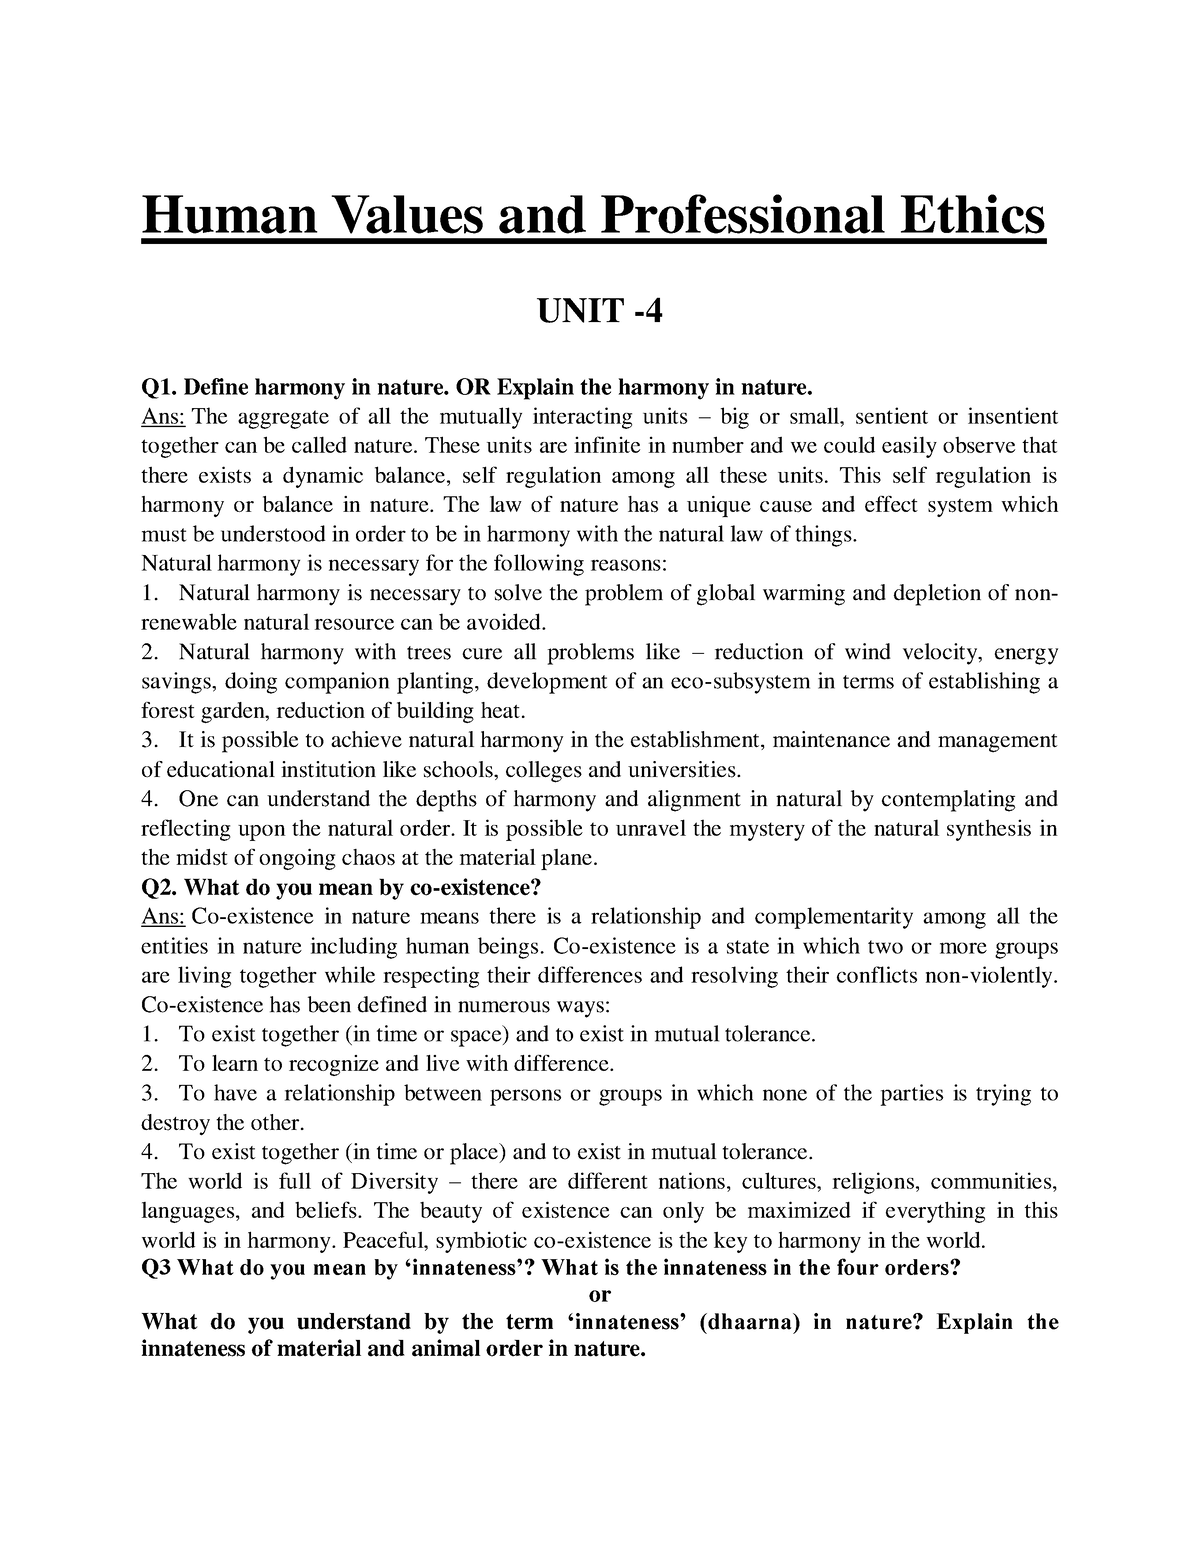 essay on human values and ethics